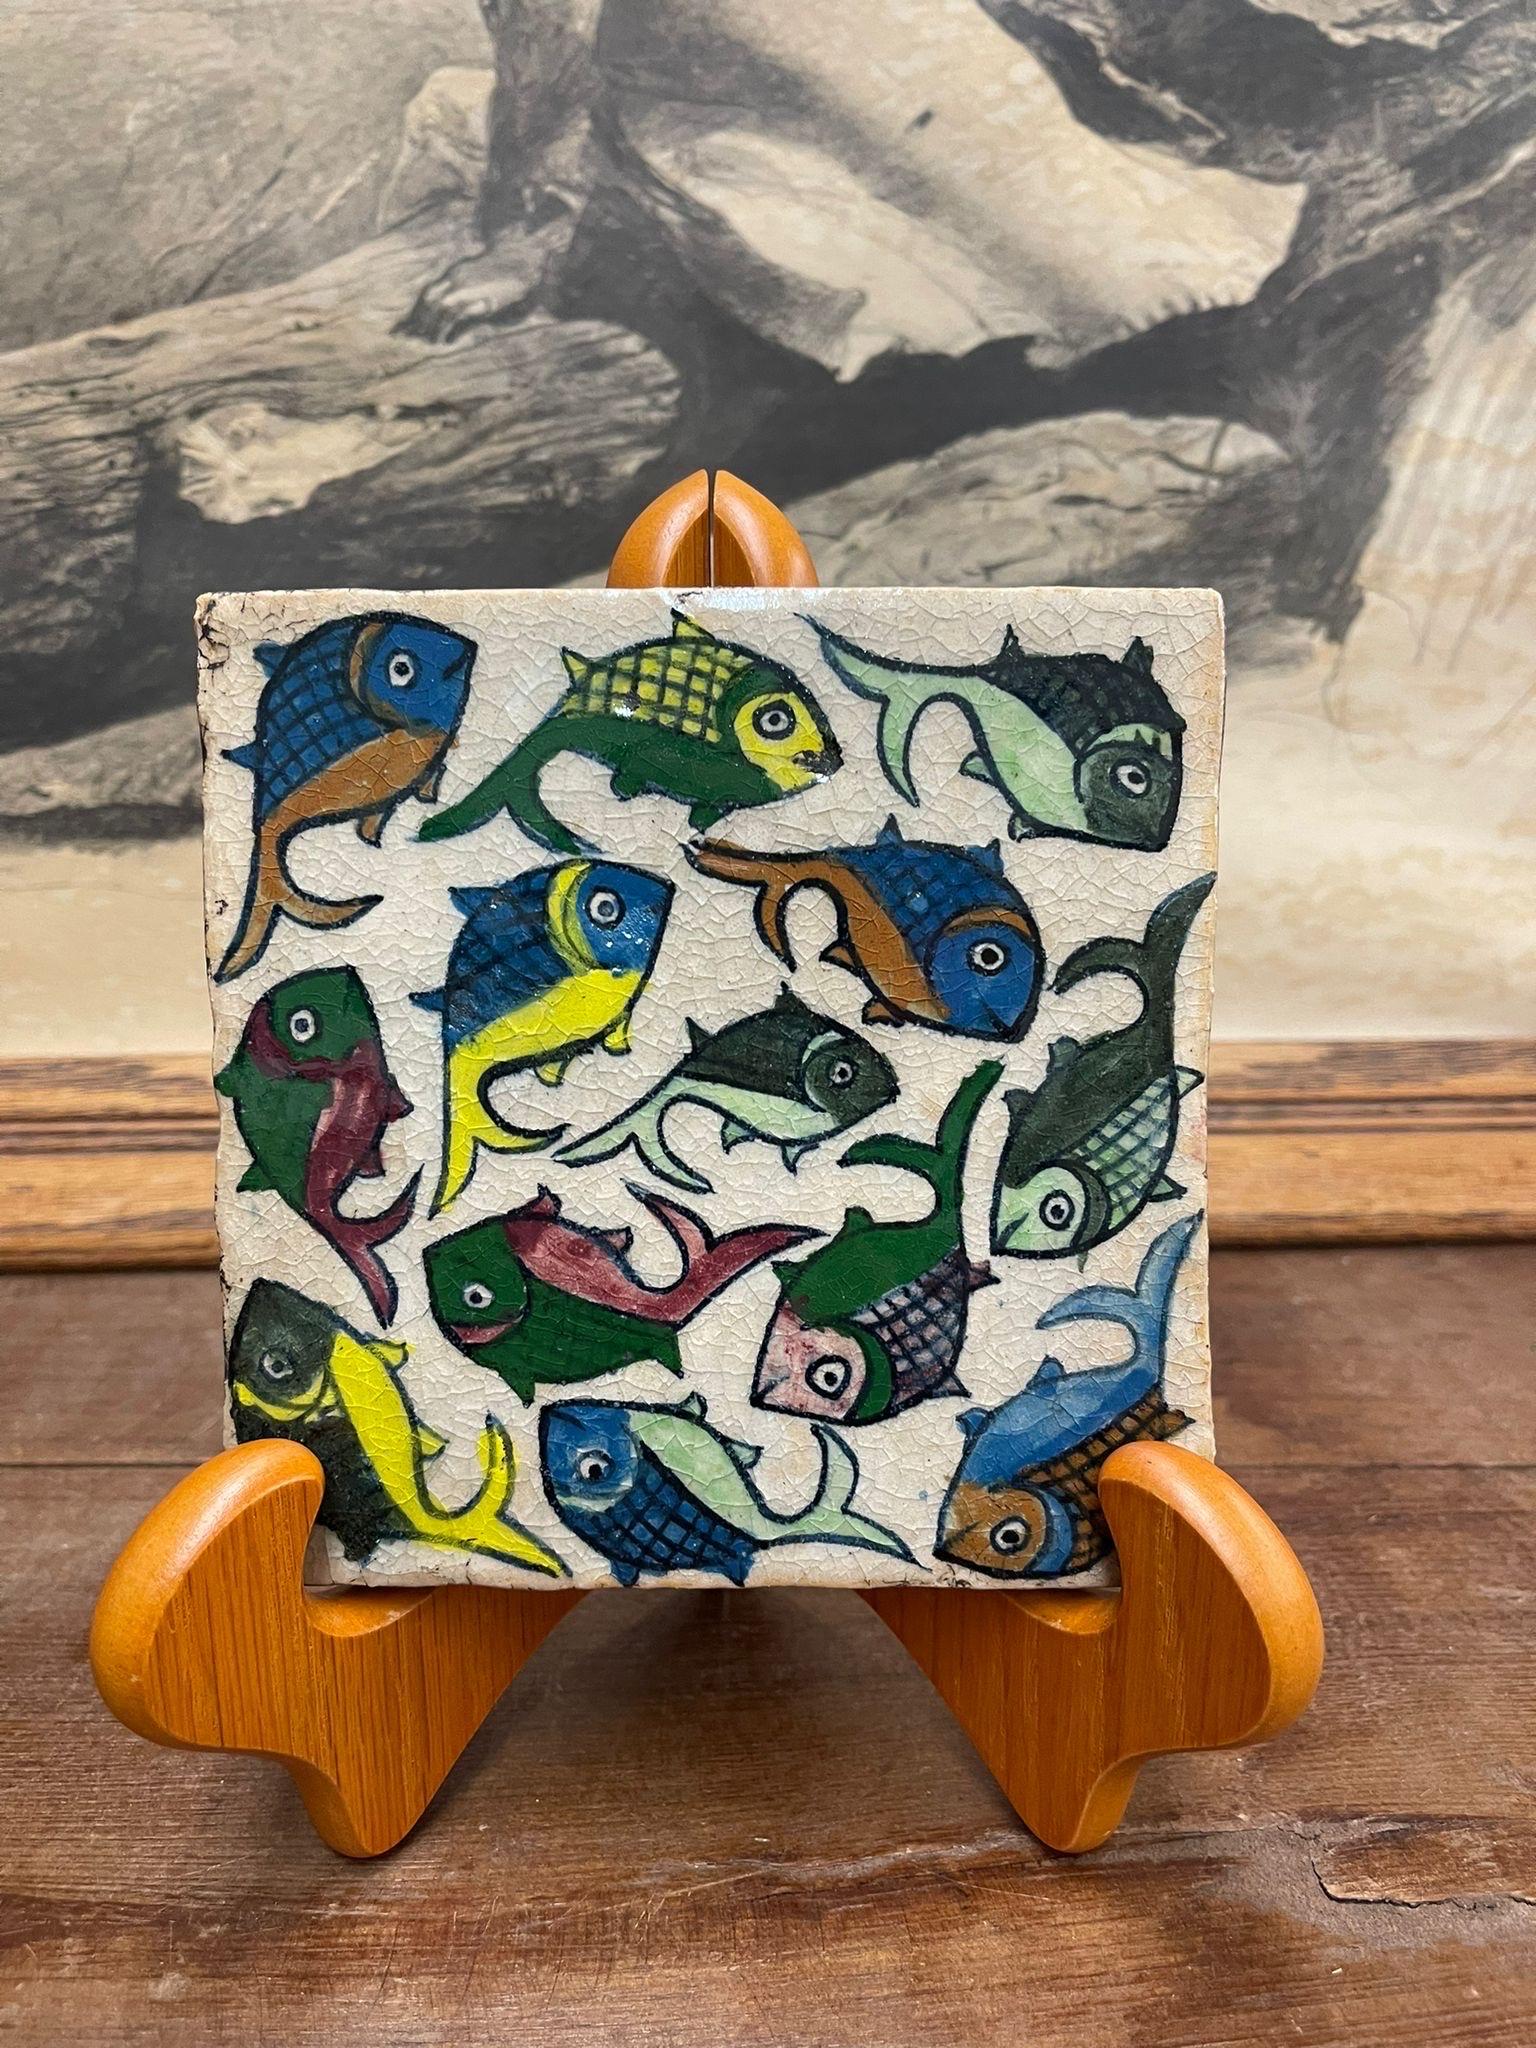 Florence Origin , Hand Painted Tile with Fish Swimming in a Circle. Vintage Condition Consistent with Age as Pictured.

Dimensions. 5 1/2 W ; 1/4 D ; 5 1/2 H